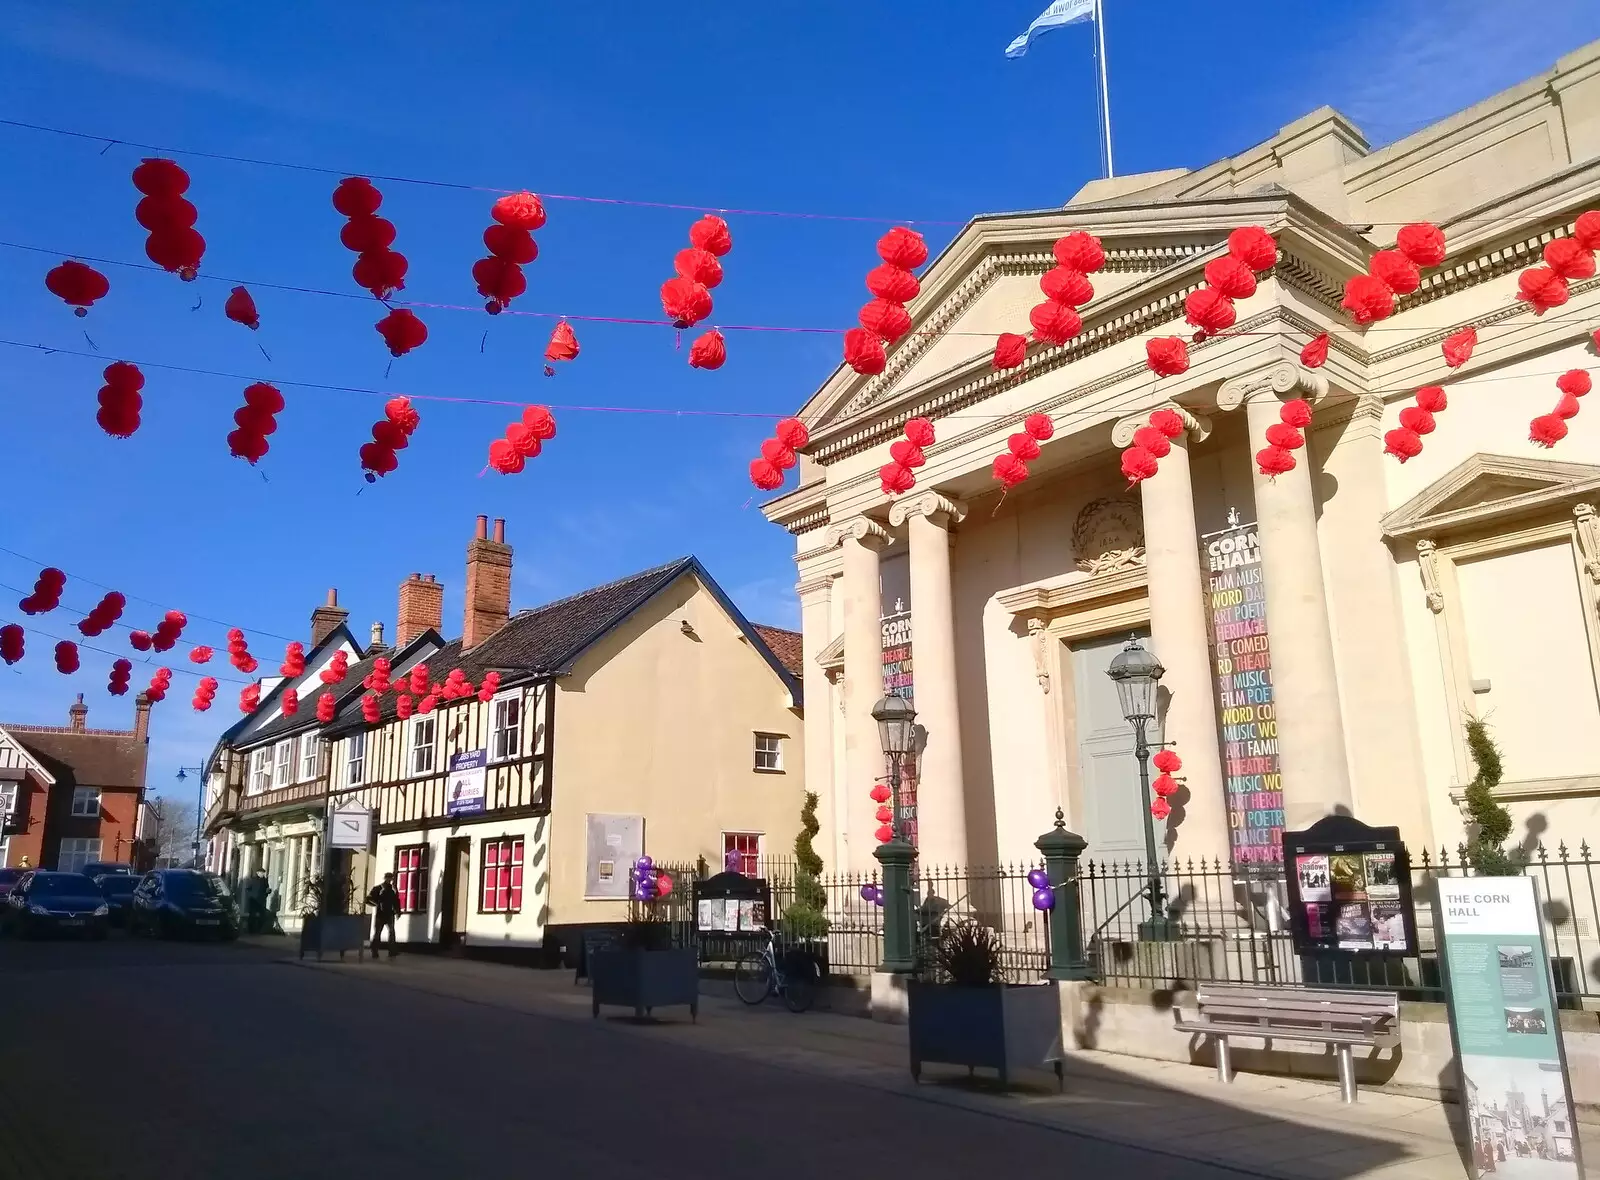 It's Chinese New Year on Market Hill, from A Walk Around Eye, and the Return of Red Tent, Suffolk and London - 25th February 2018